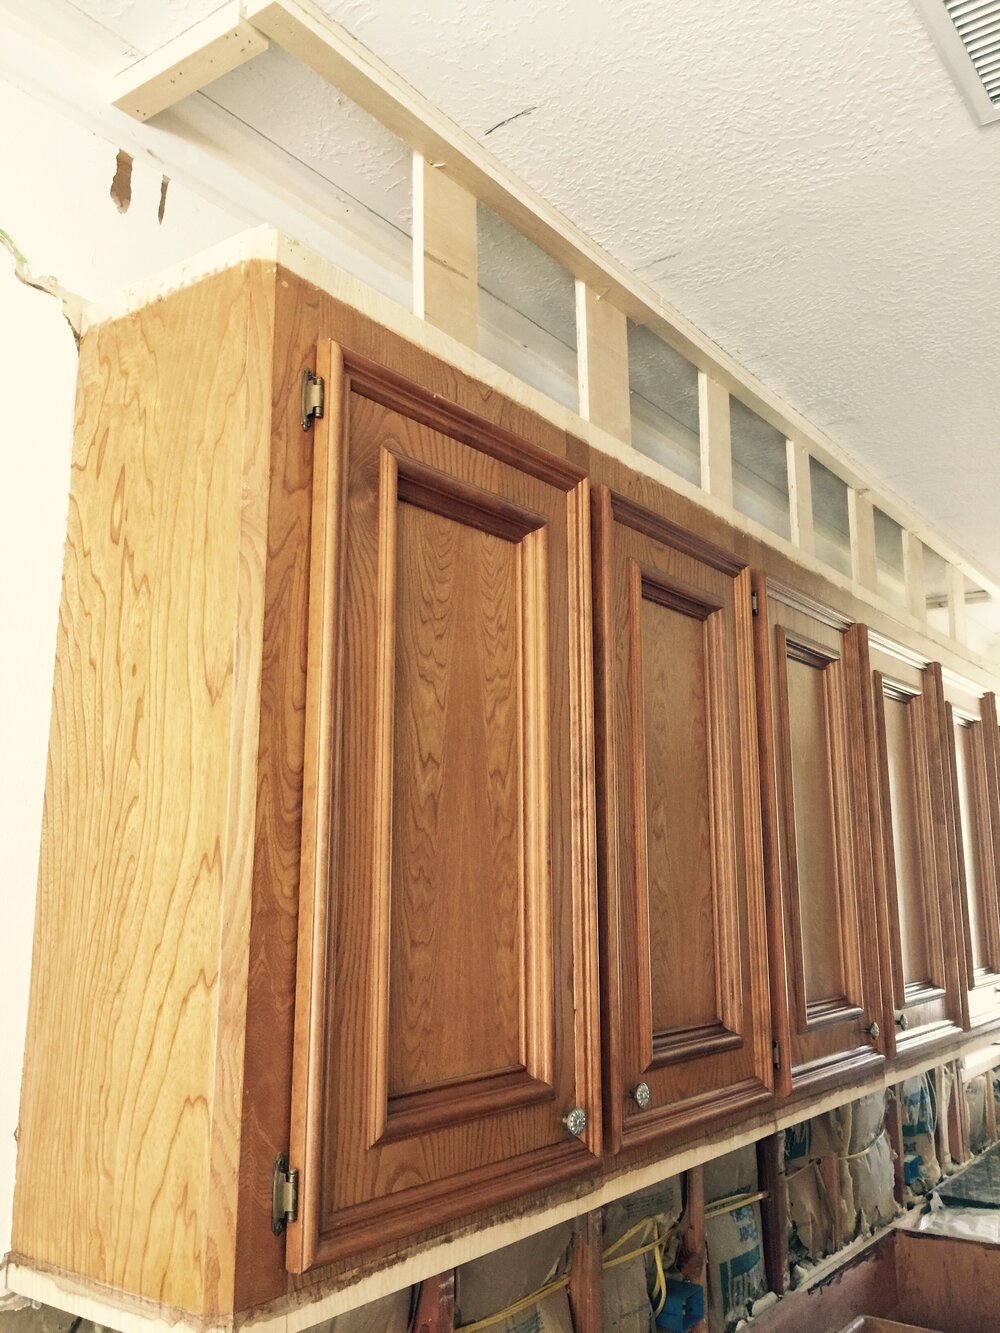 During Construction - the upper section was boxed in and new mouldings were applied to get a taller upper cabinet look.